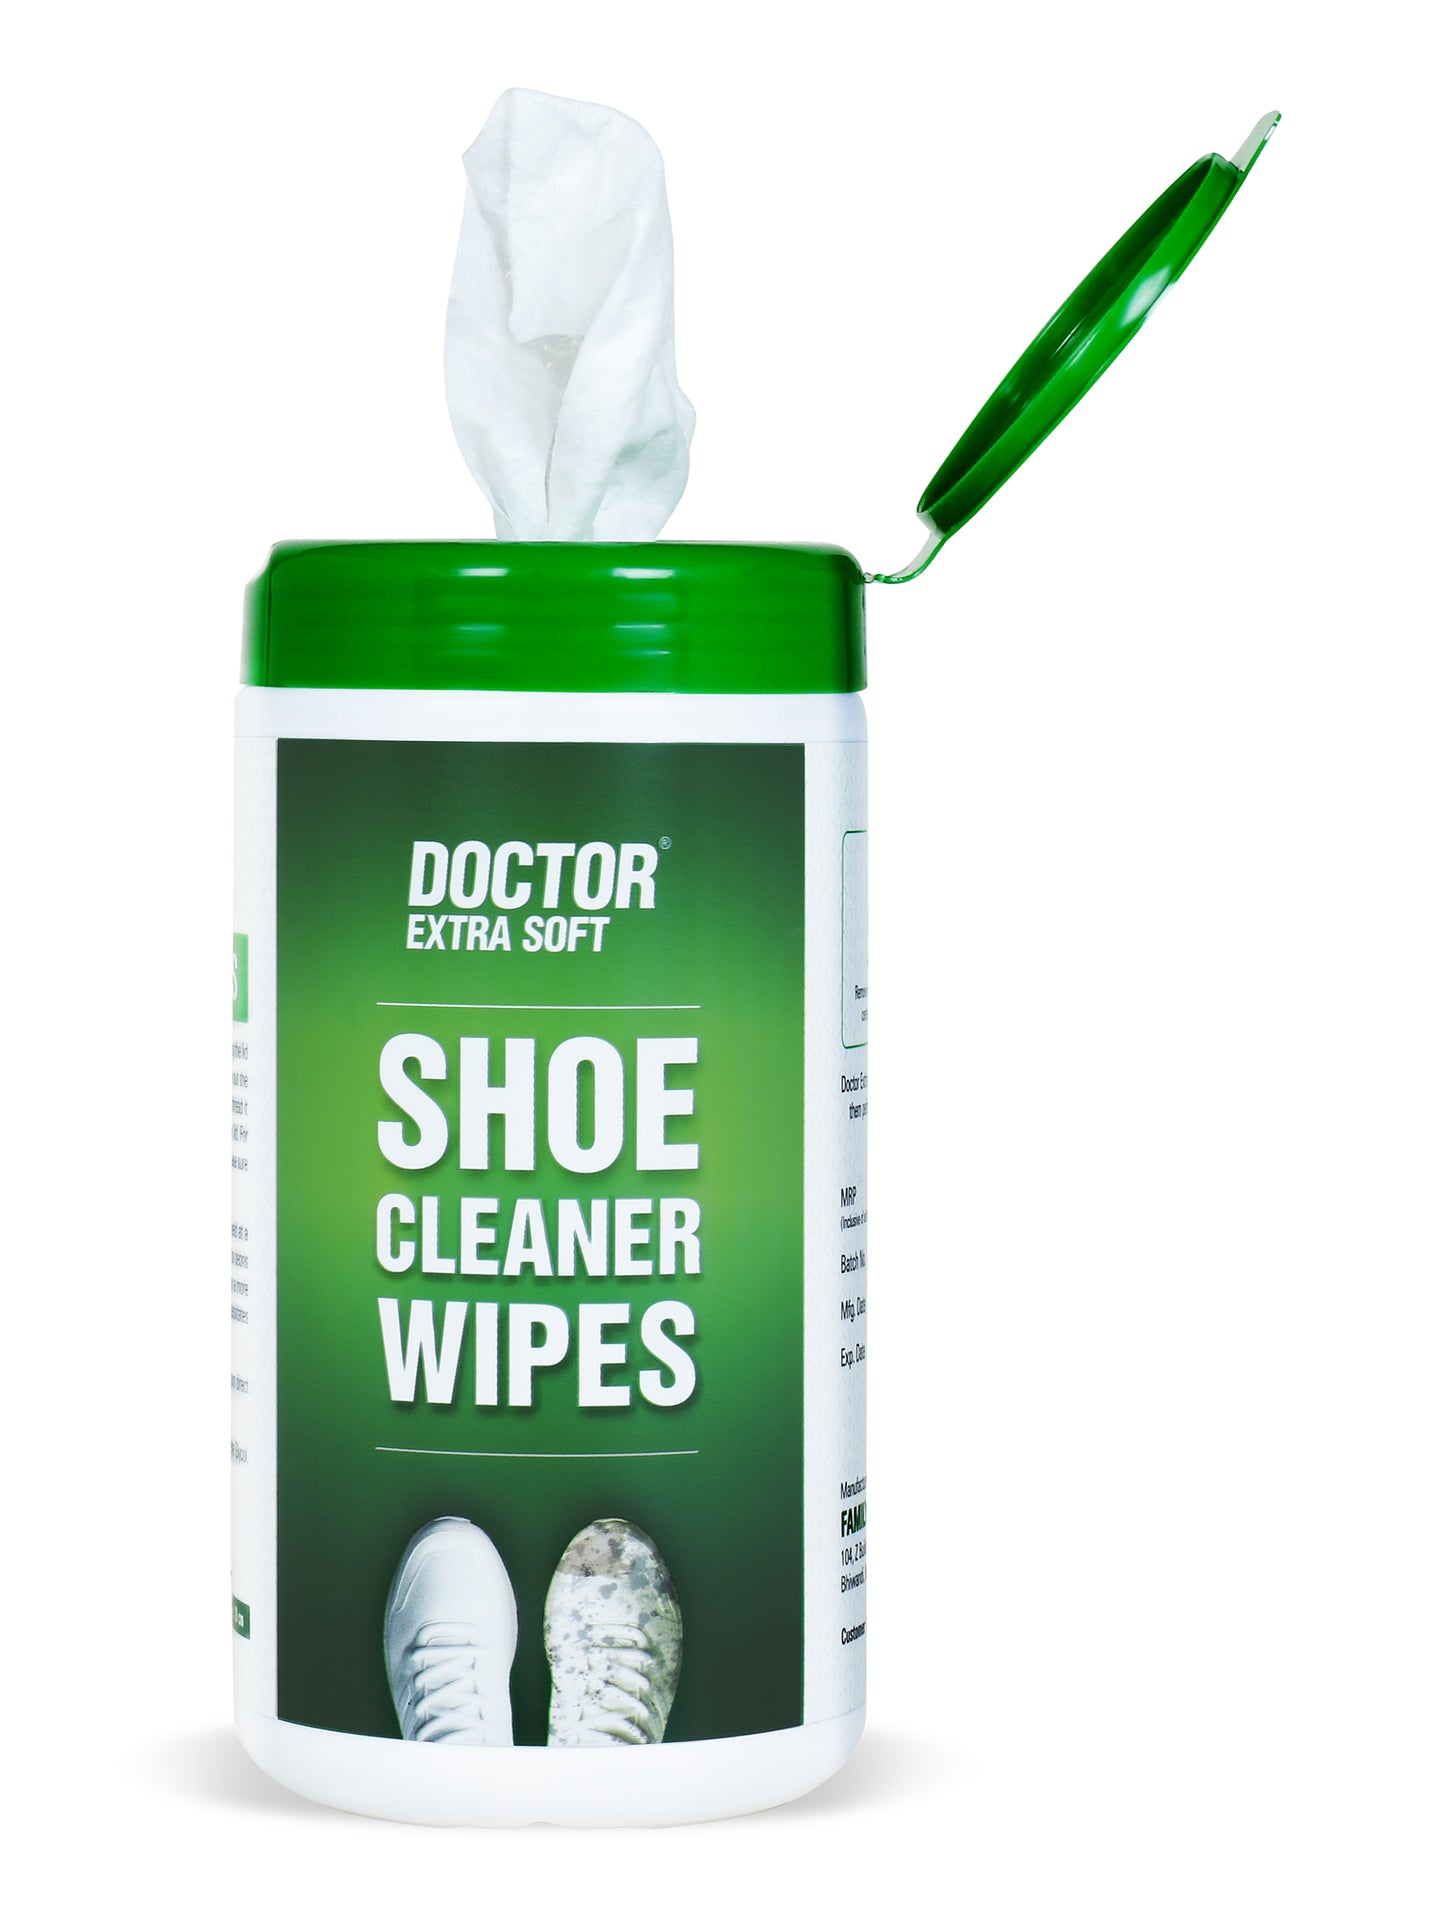 Doctor Extra Soft D-921 Shoe Cleaner Wet Wipes For Shoes/Loafers/Sandals/Slippers/Athletic Shoes/Sneakers/White Shoes/Tennis Shoes/Scrub Off Dirt/Mud/Grass Stains - 50 Wipes (Ready to Use)